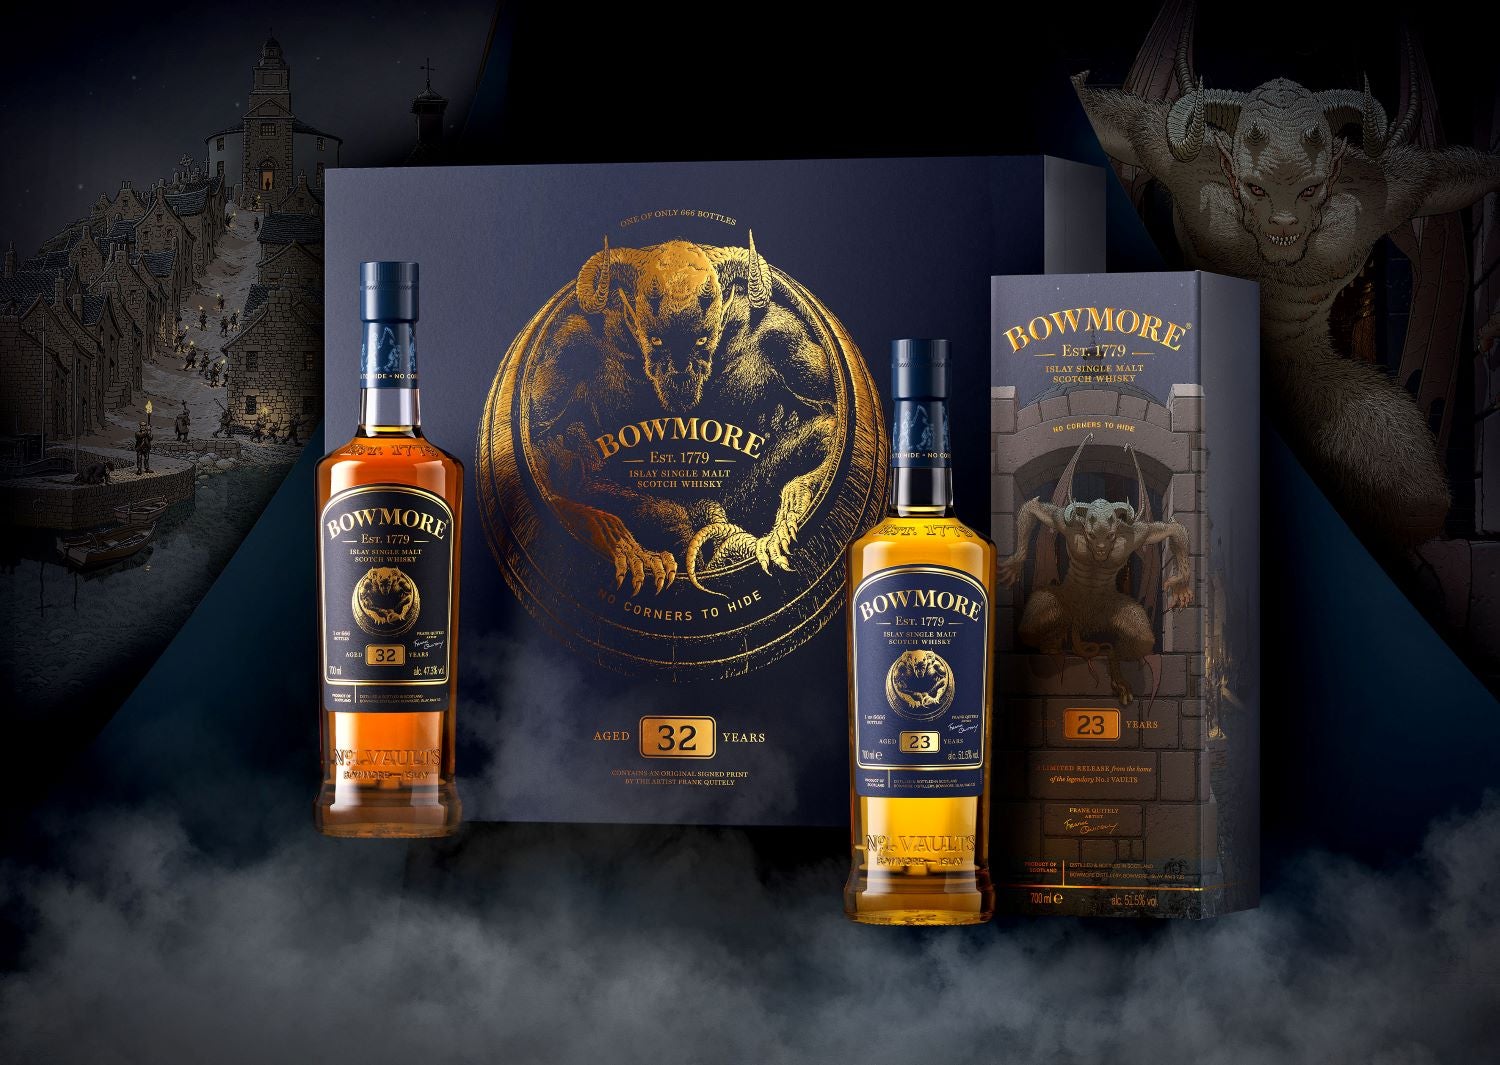 Bowmore Unveils the Myth-Inspired No Corners to Hide Series